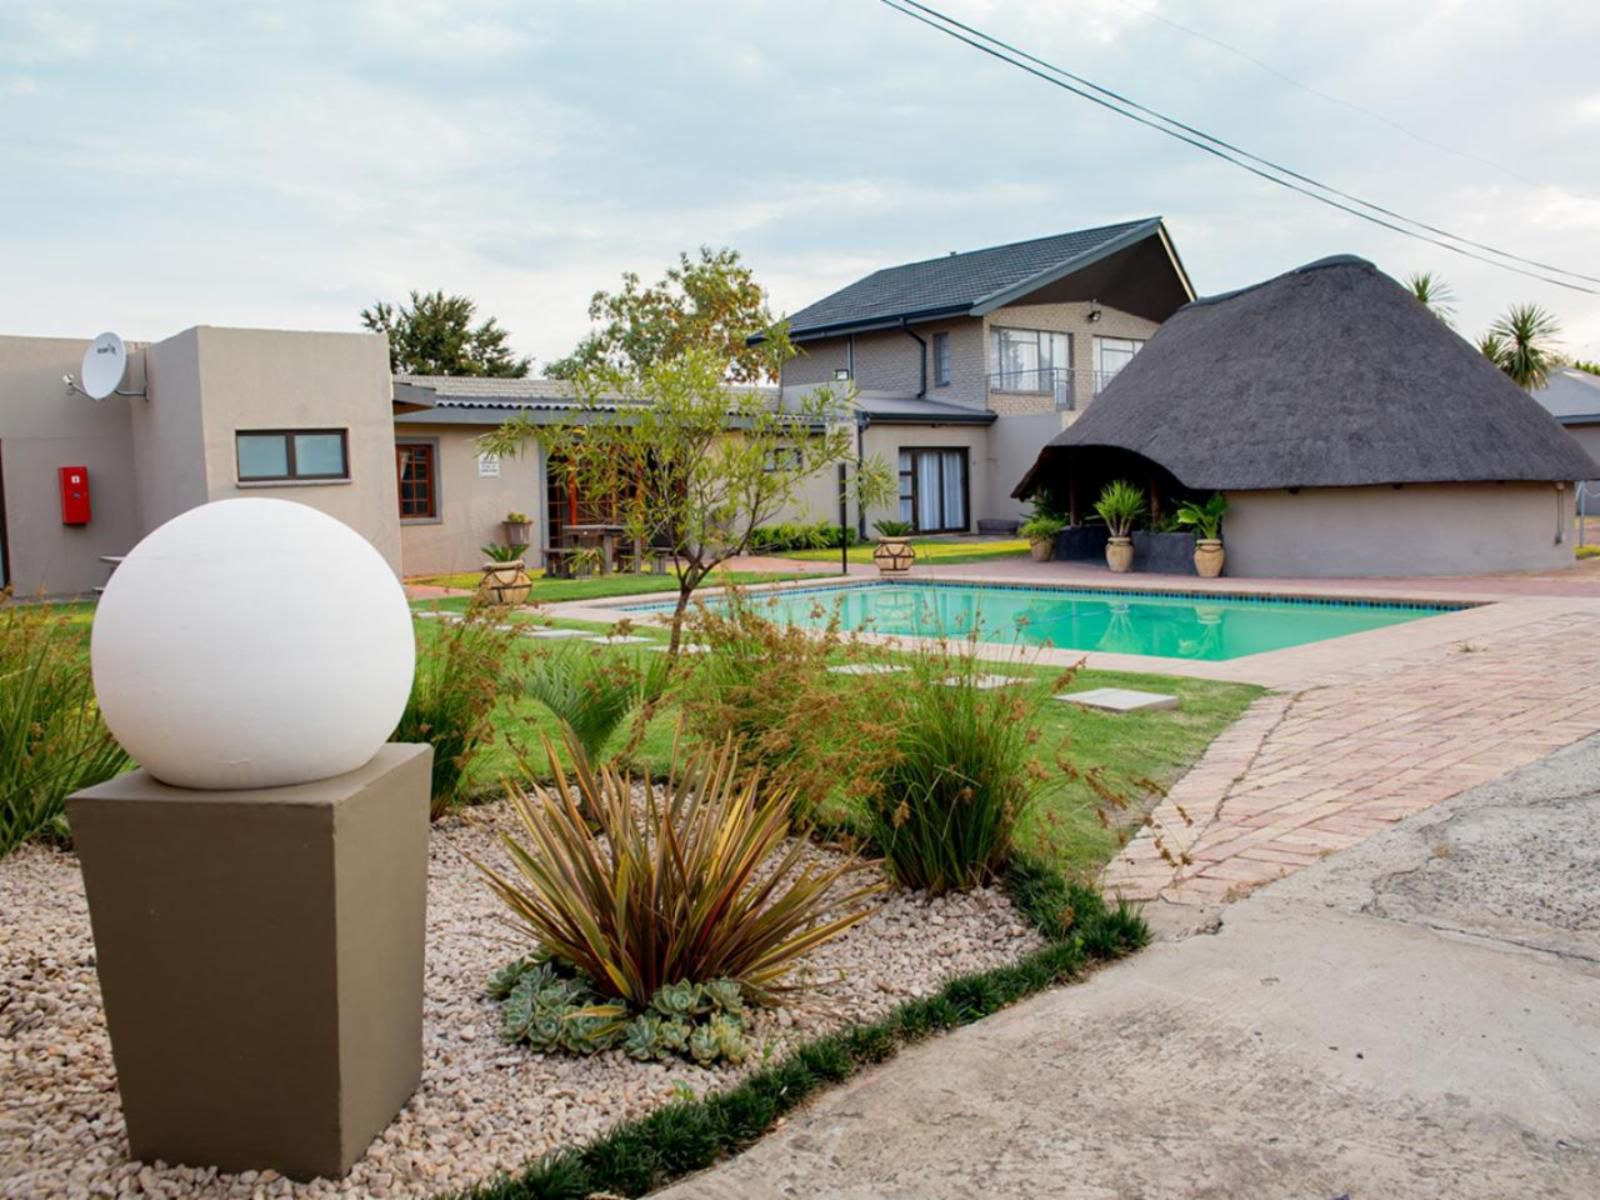 Appledew Guest House Standerton Mpumalanga South Africa House, Building, Architecture